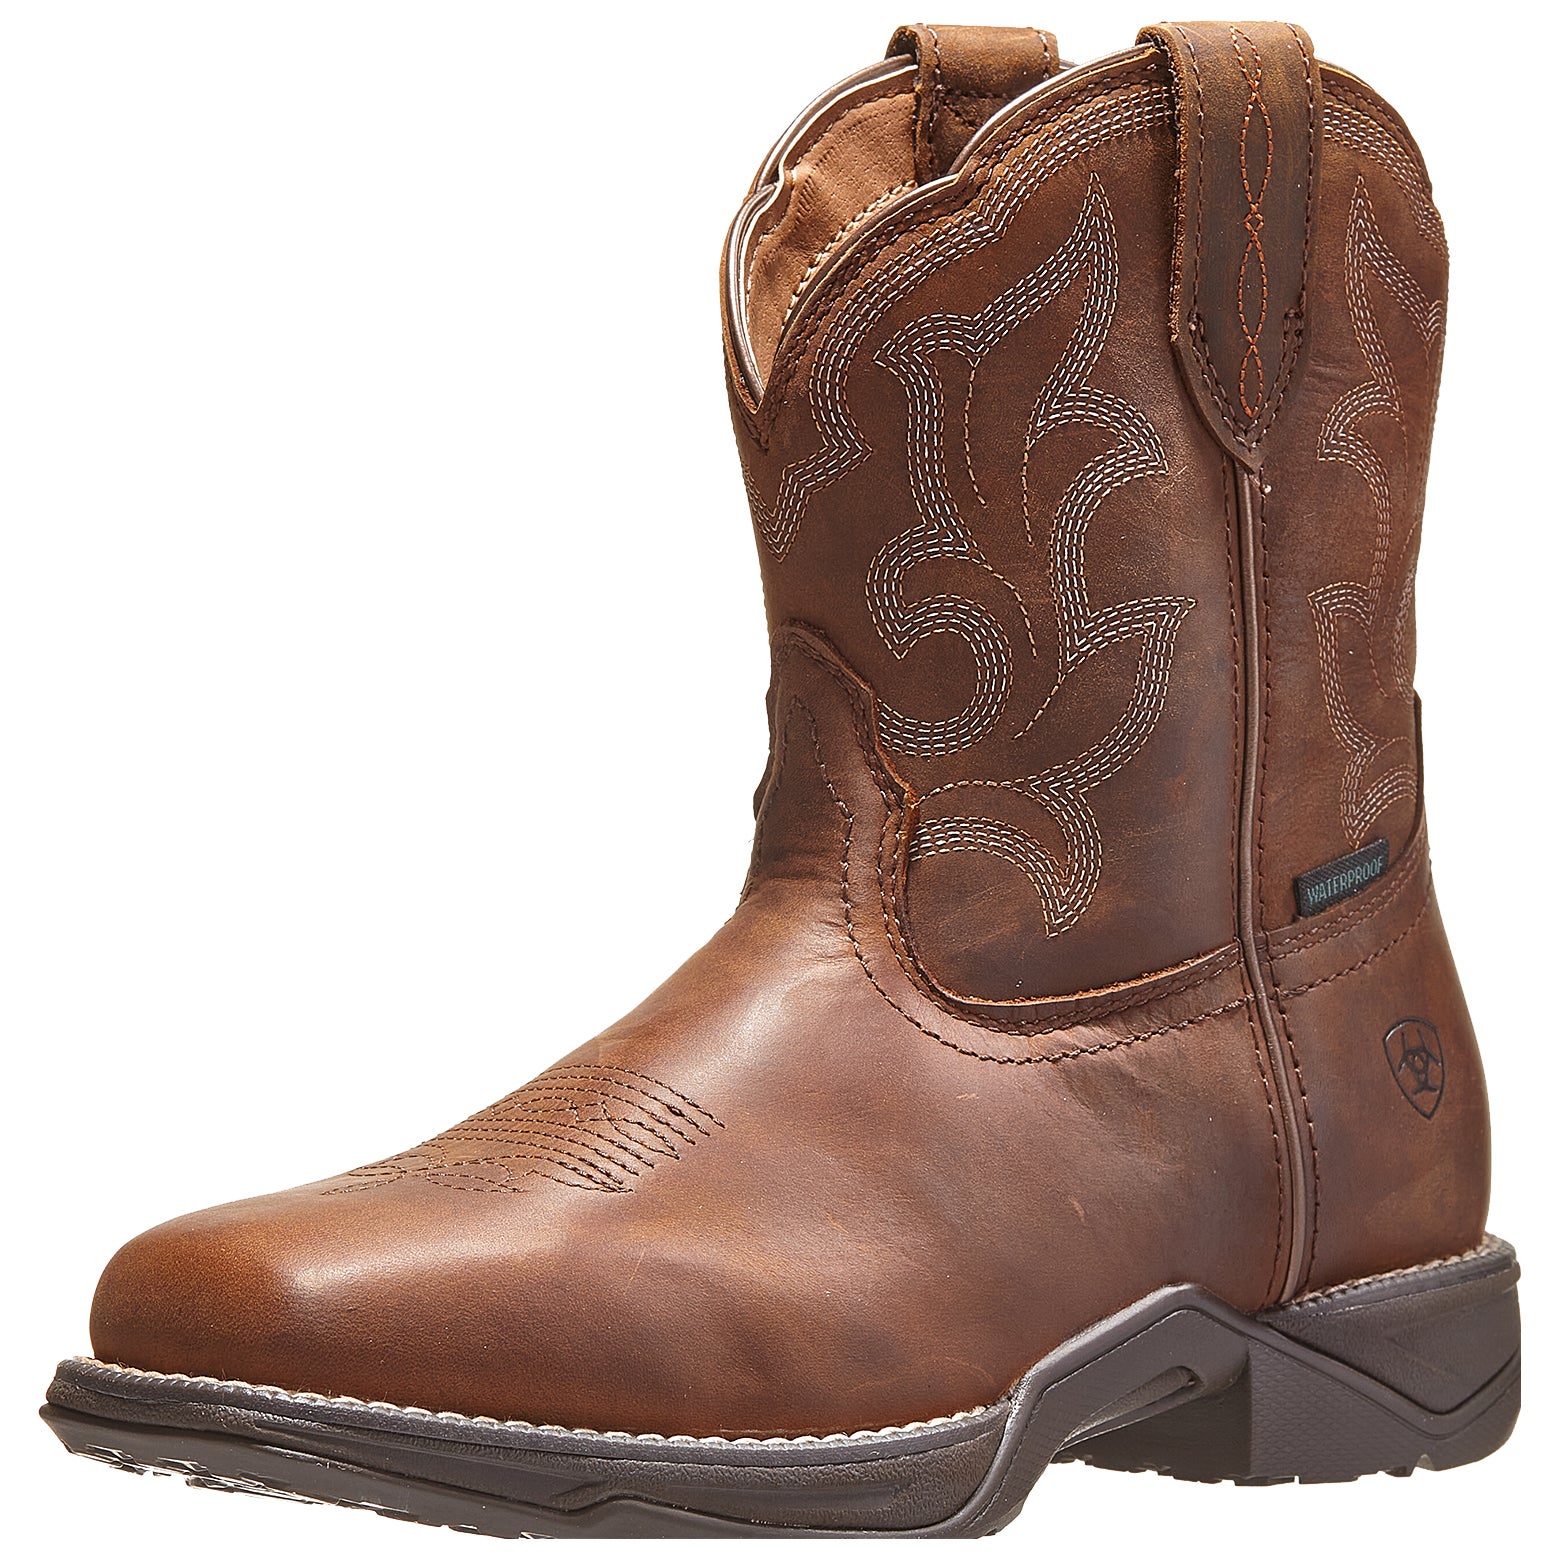 ARIAT ANTHEM H2O WATERPROOF LADIES LEATHER WESTERN BOOTS Sizes 3 to 8 